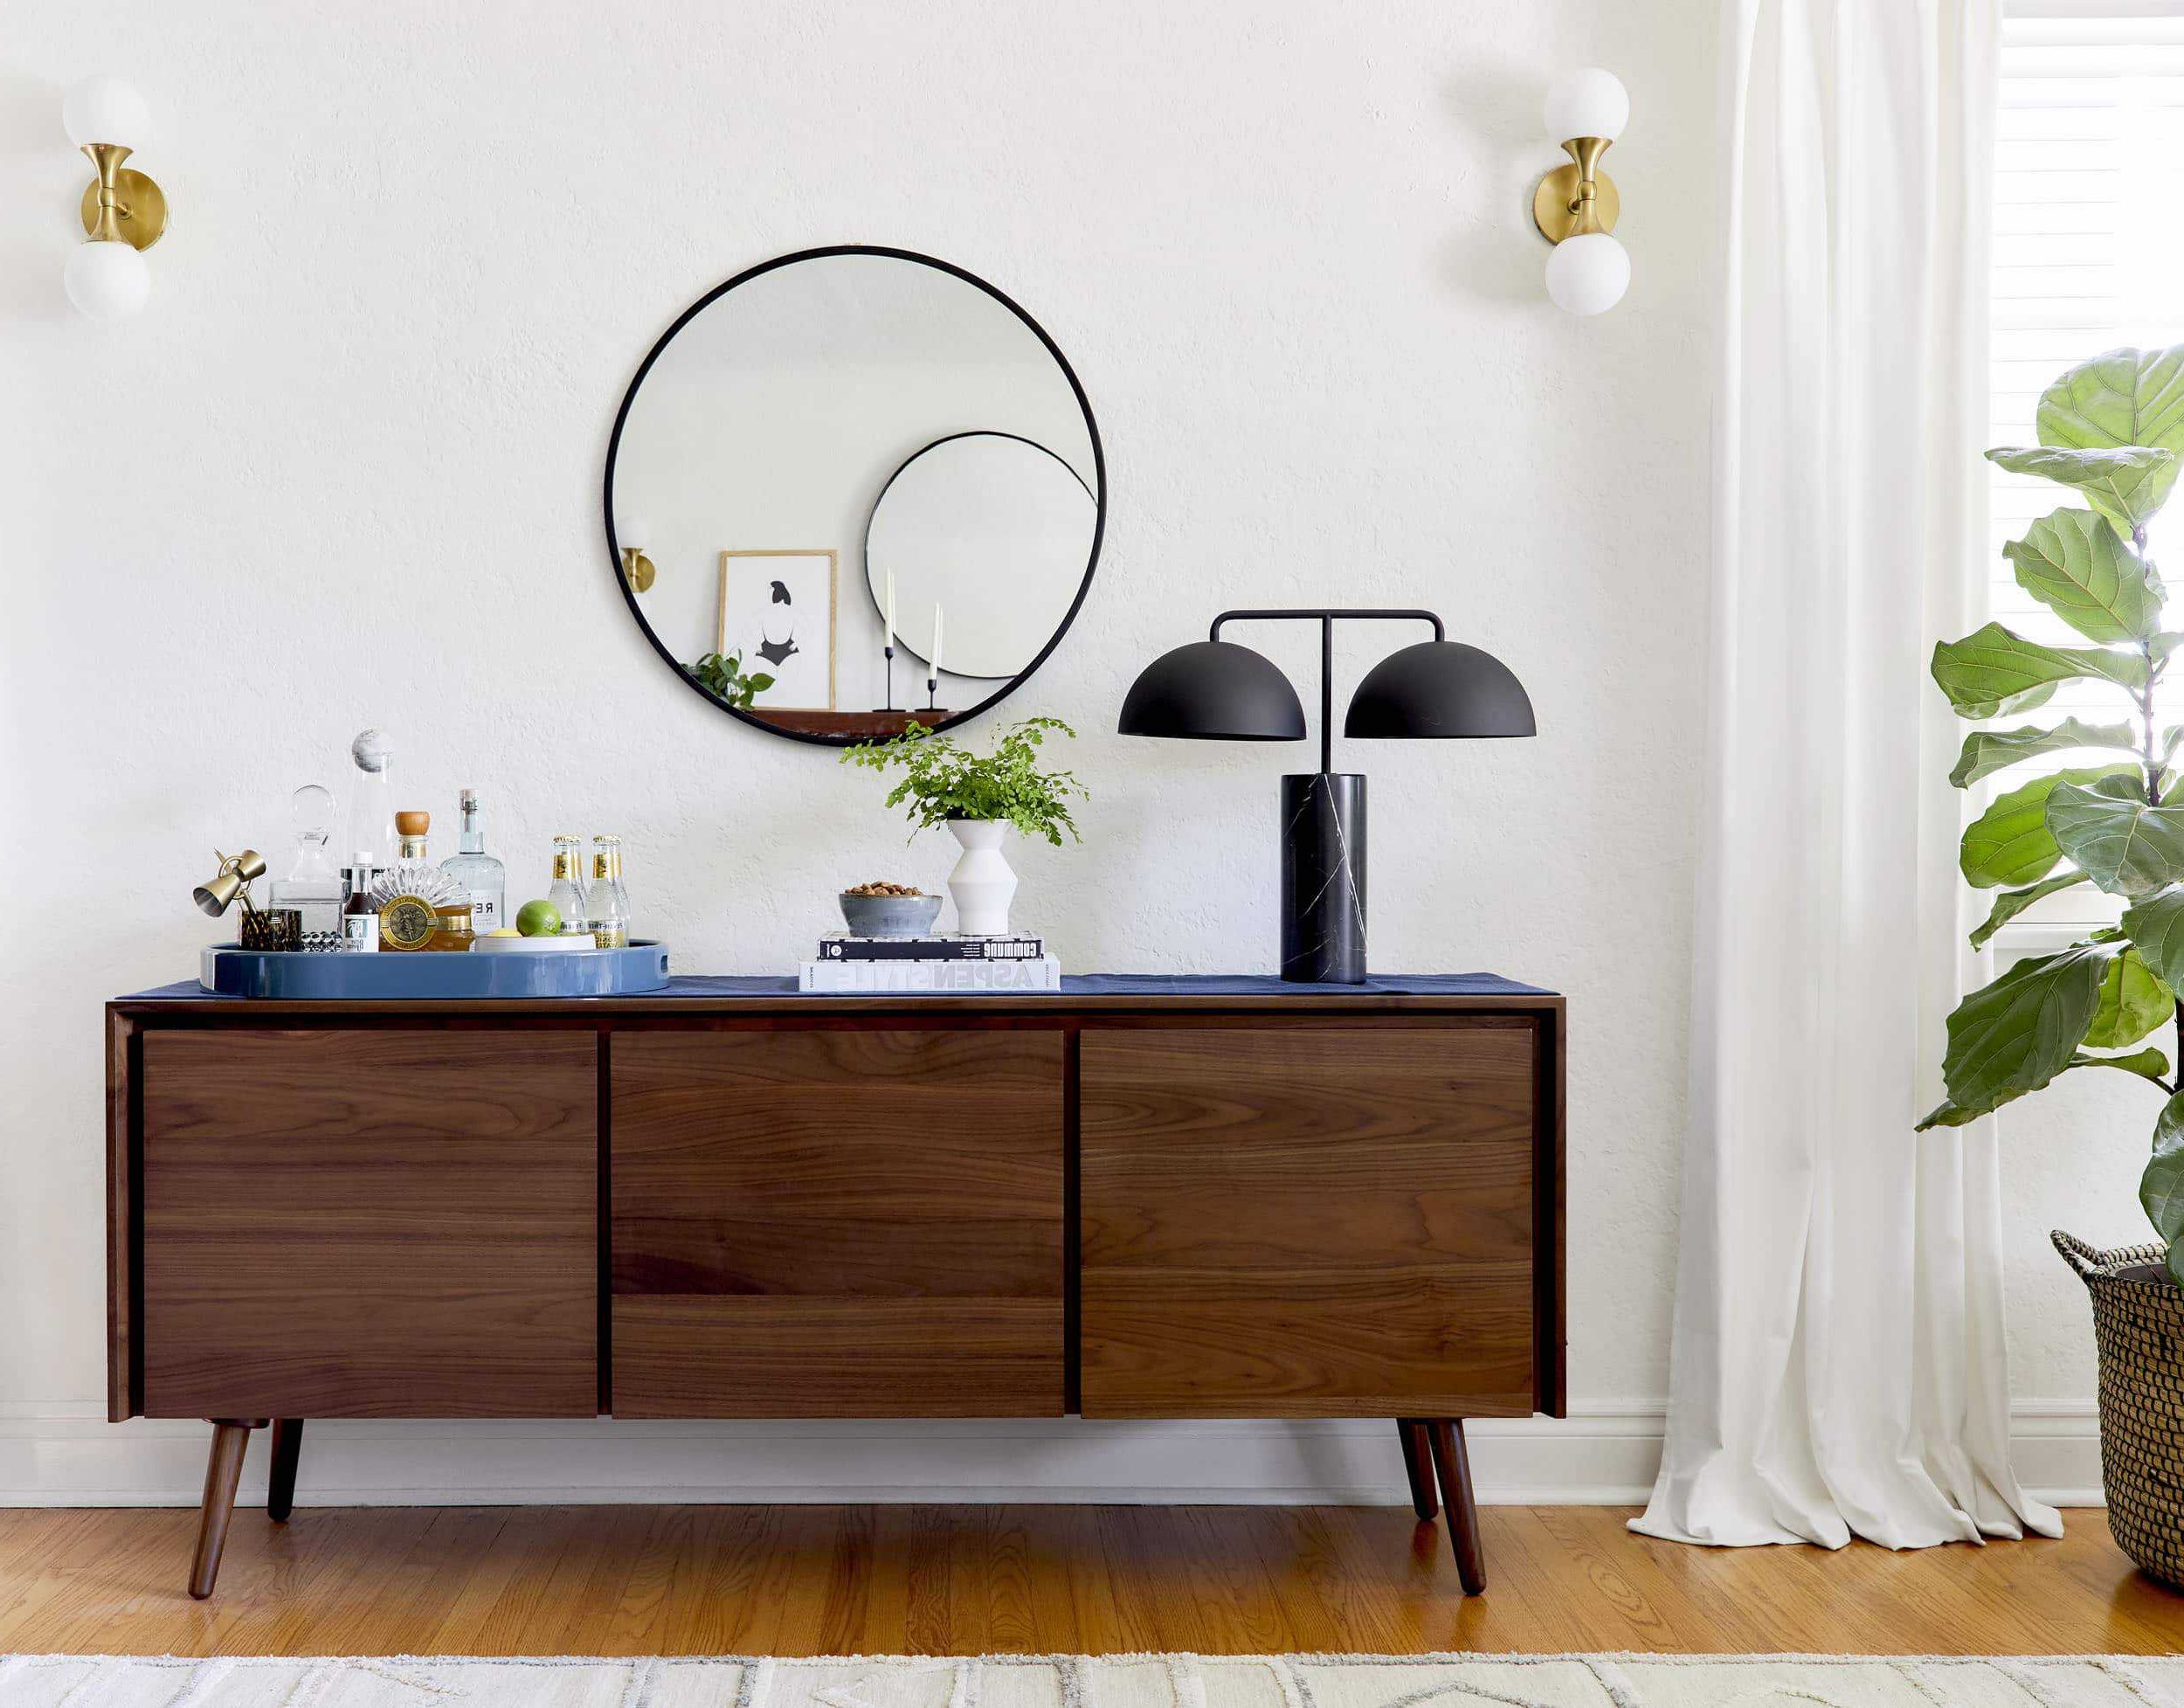 4 Ways To Style That Credenza For "real Life" + Shop Our Favorite Credenzas  – Emily Henderson Pertaining To Credenzas For Living Room (View 11 of 20)